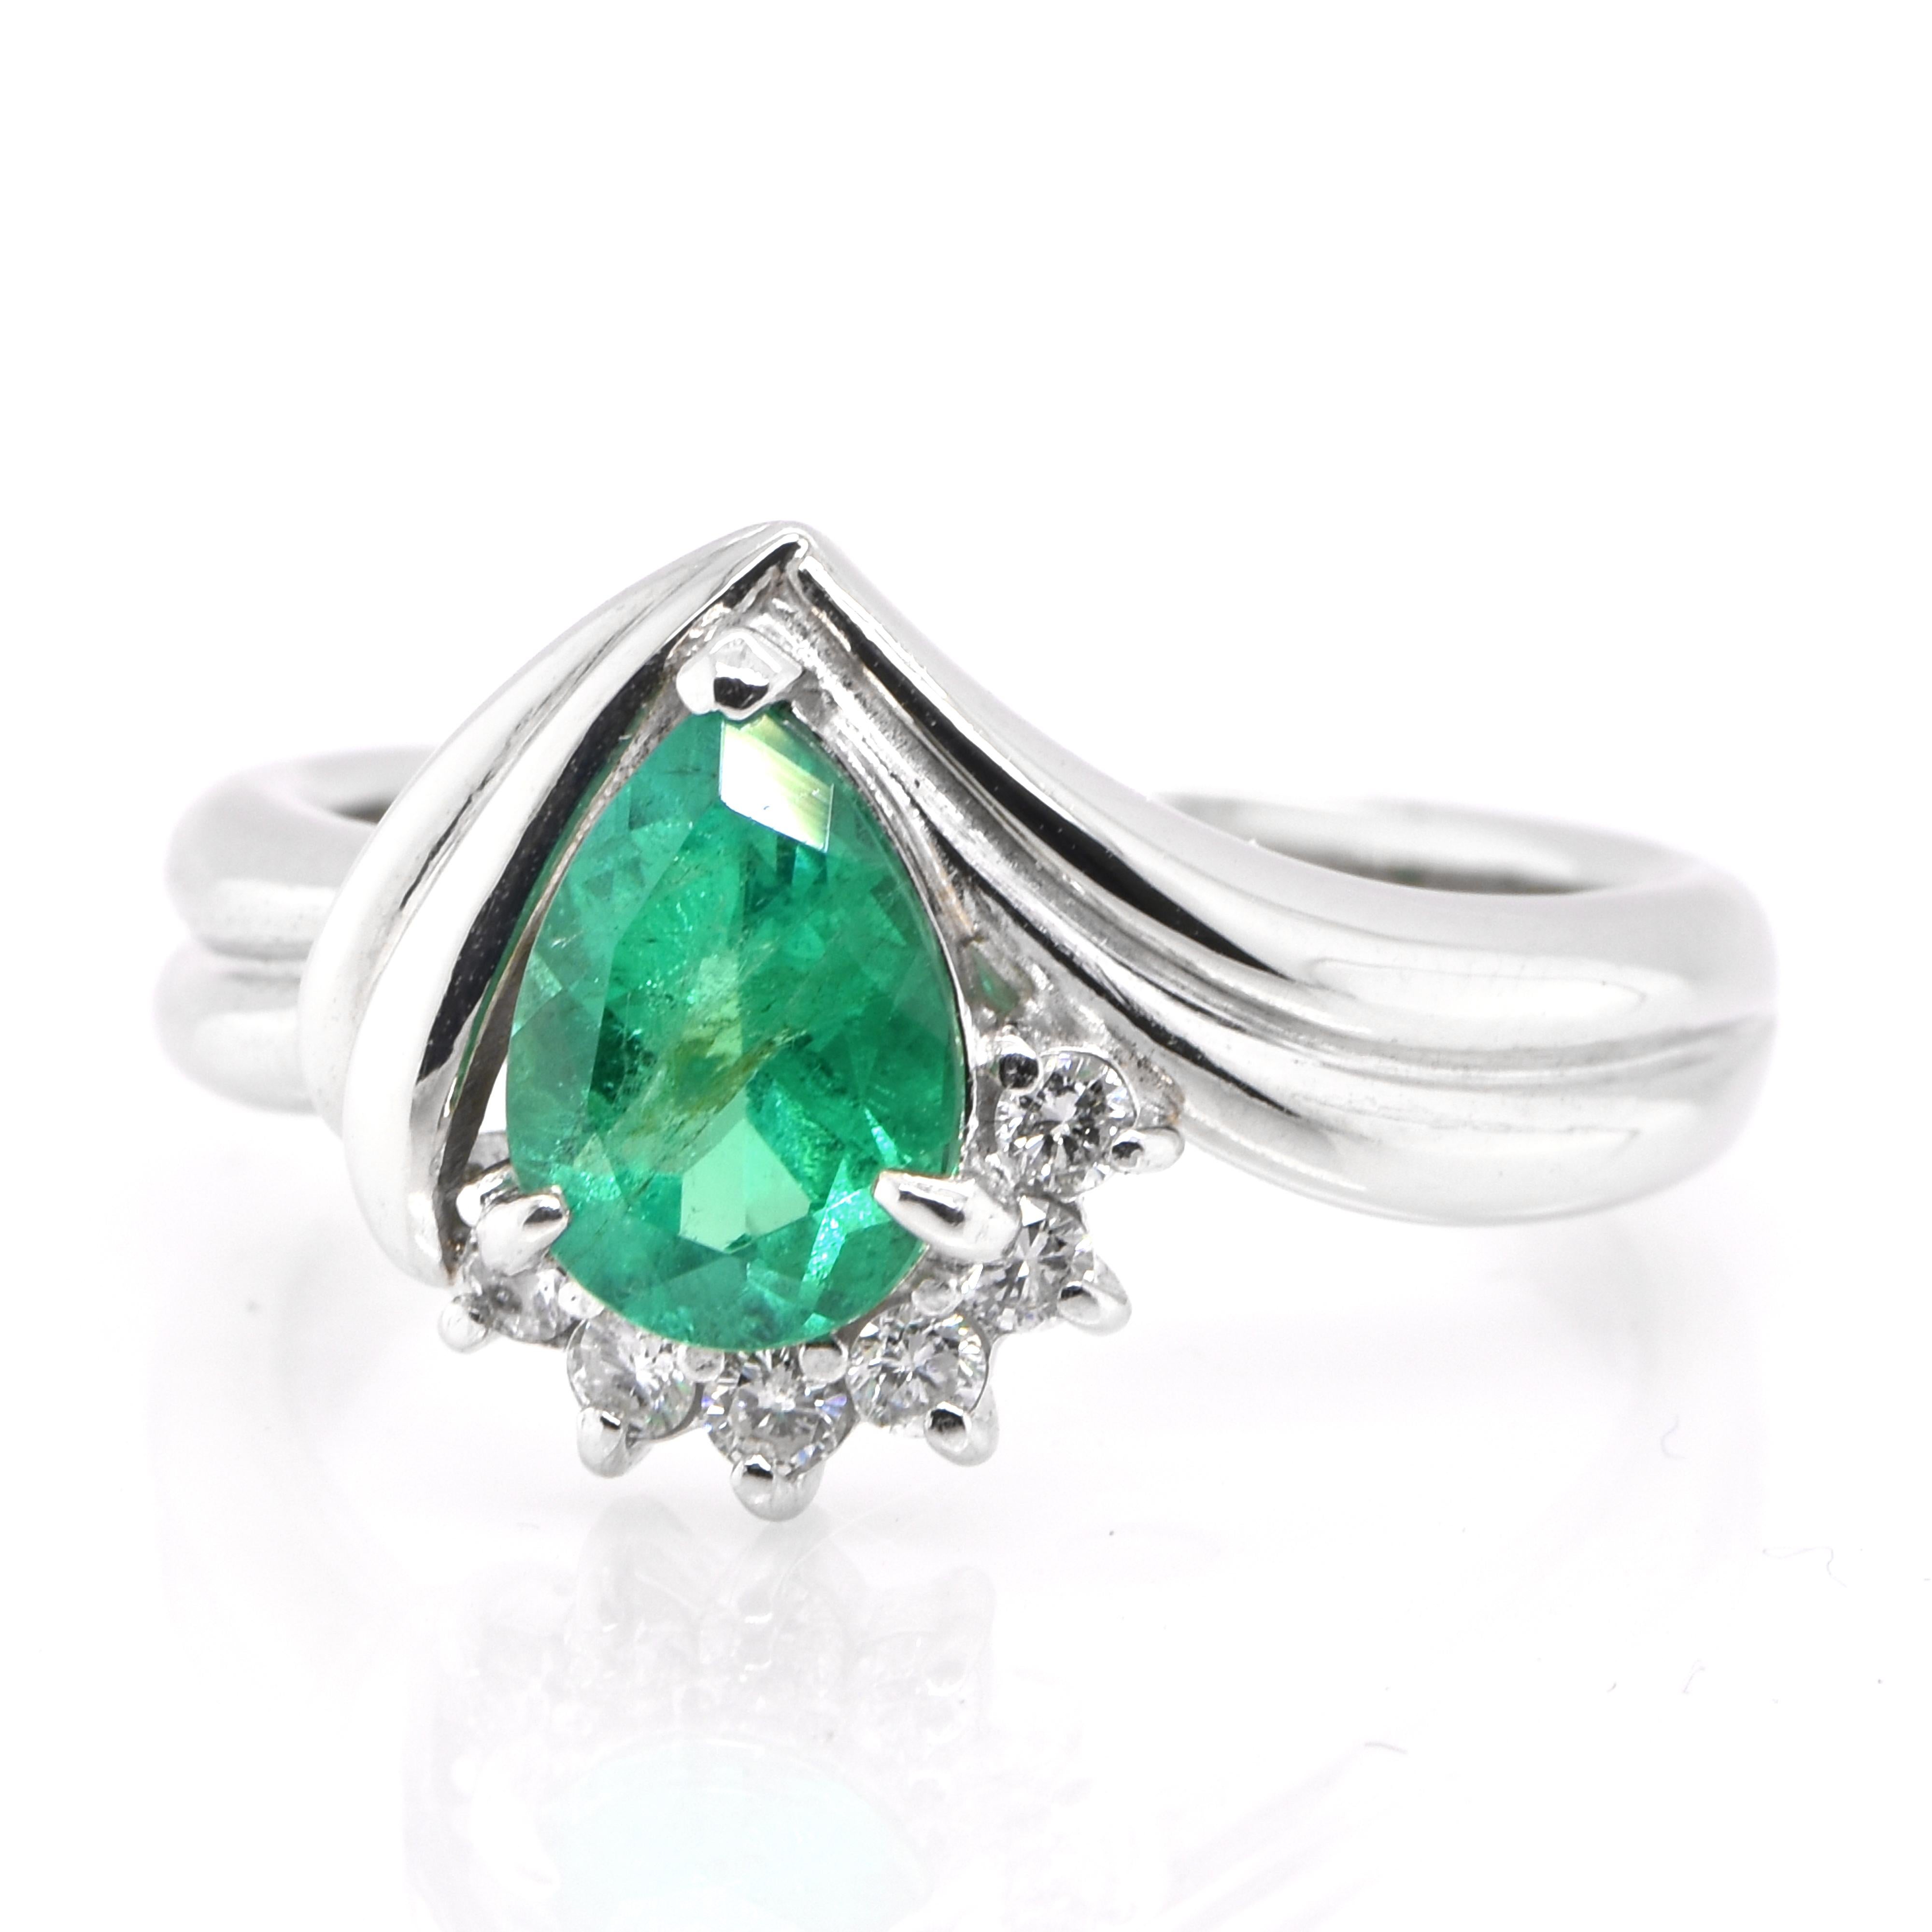 A stunning ring featuring a 0.912 Carat Natural Colombian Emerald and 0.12 Carats of Diamond Accents set in Platinum. People have admired emerald’s green for thousands of years. Emeralds have always been associated with the lushest landscapes and